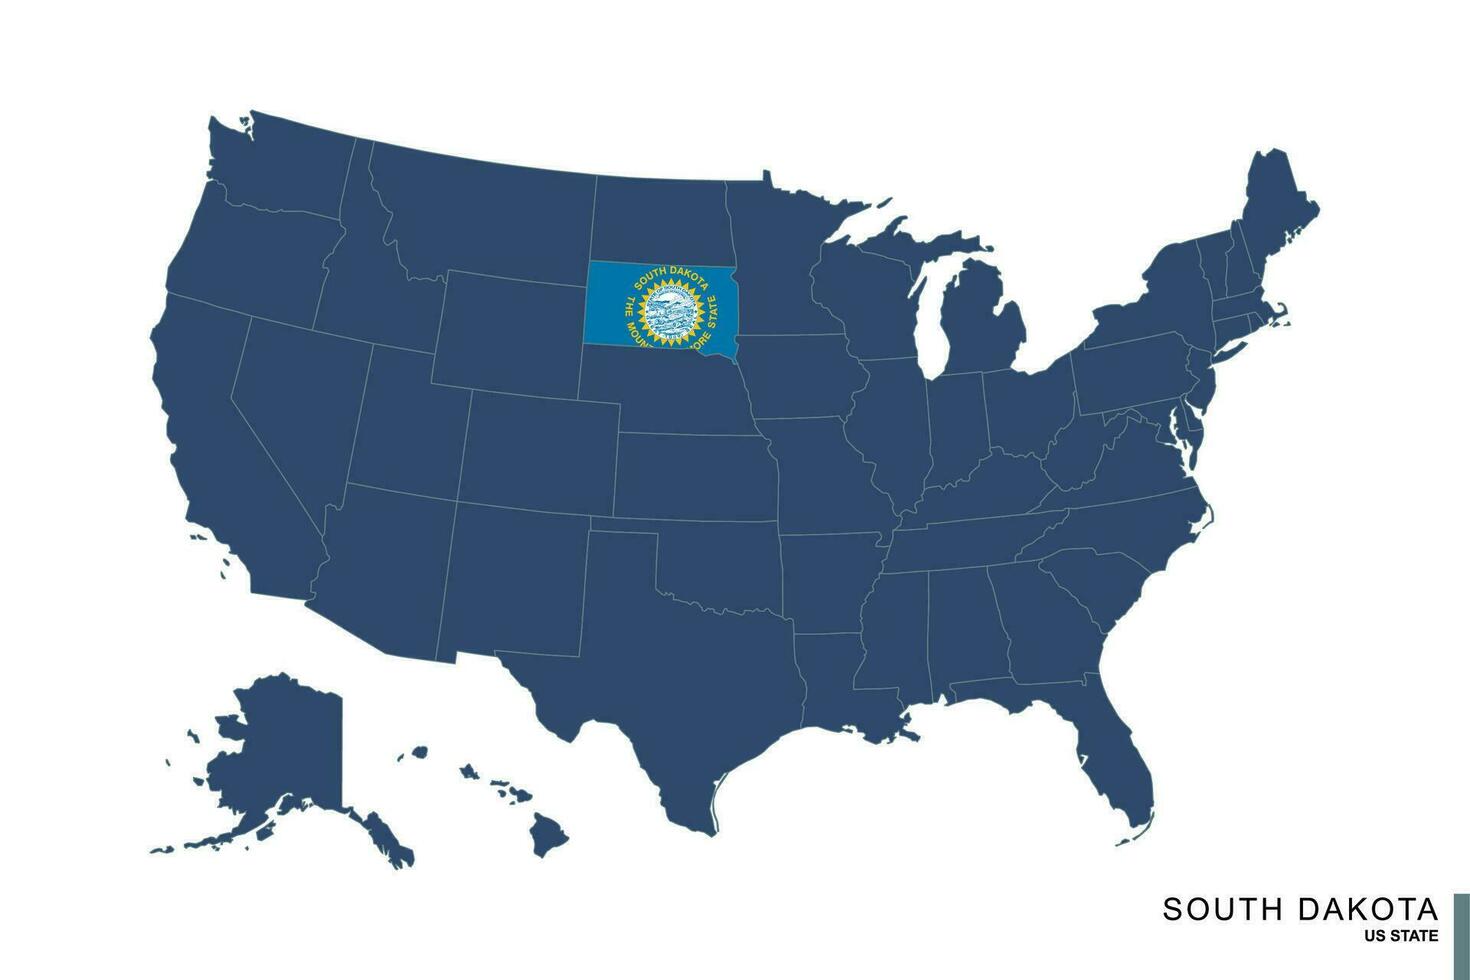 State of South Dakota on blue map of United States of America. Flag and map of South Dakota. vector